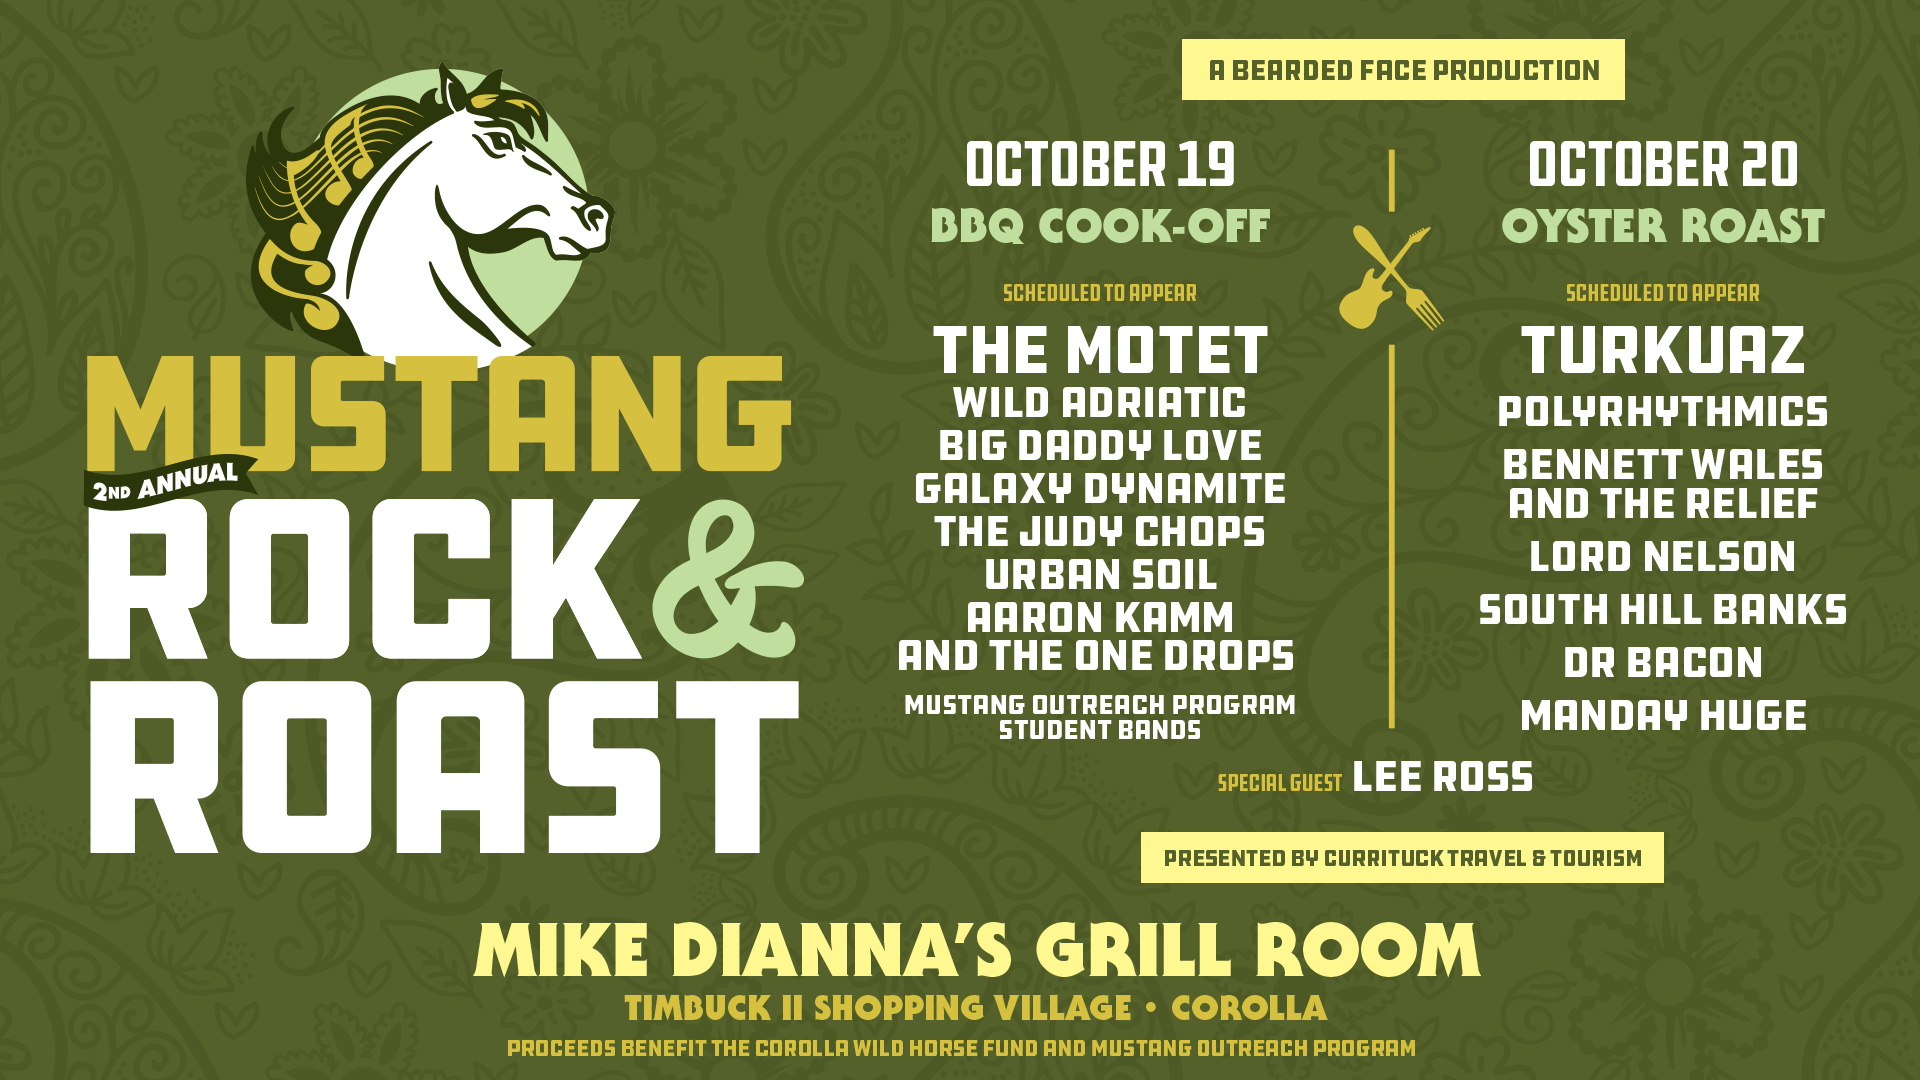 Mustang Rock and Roast